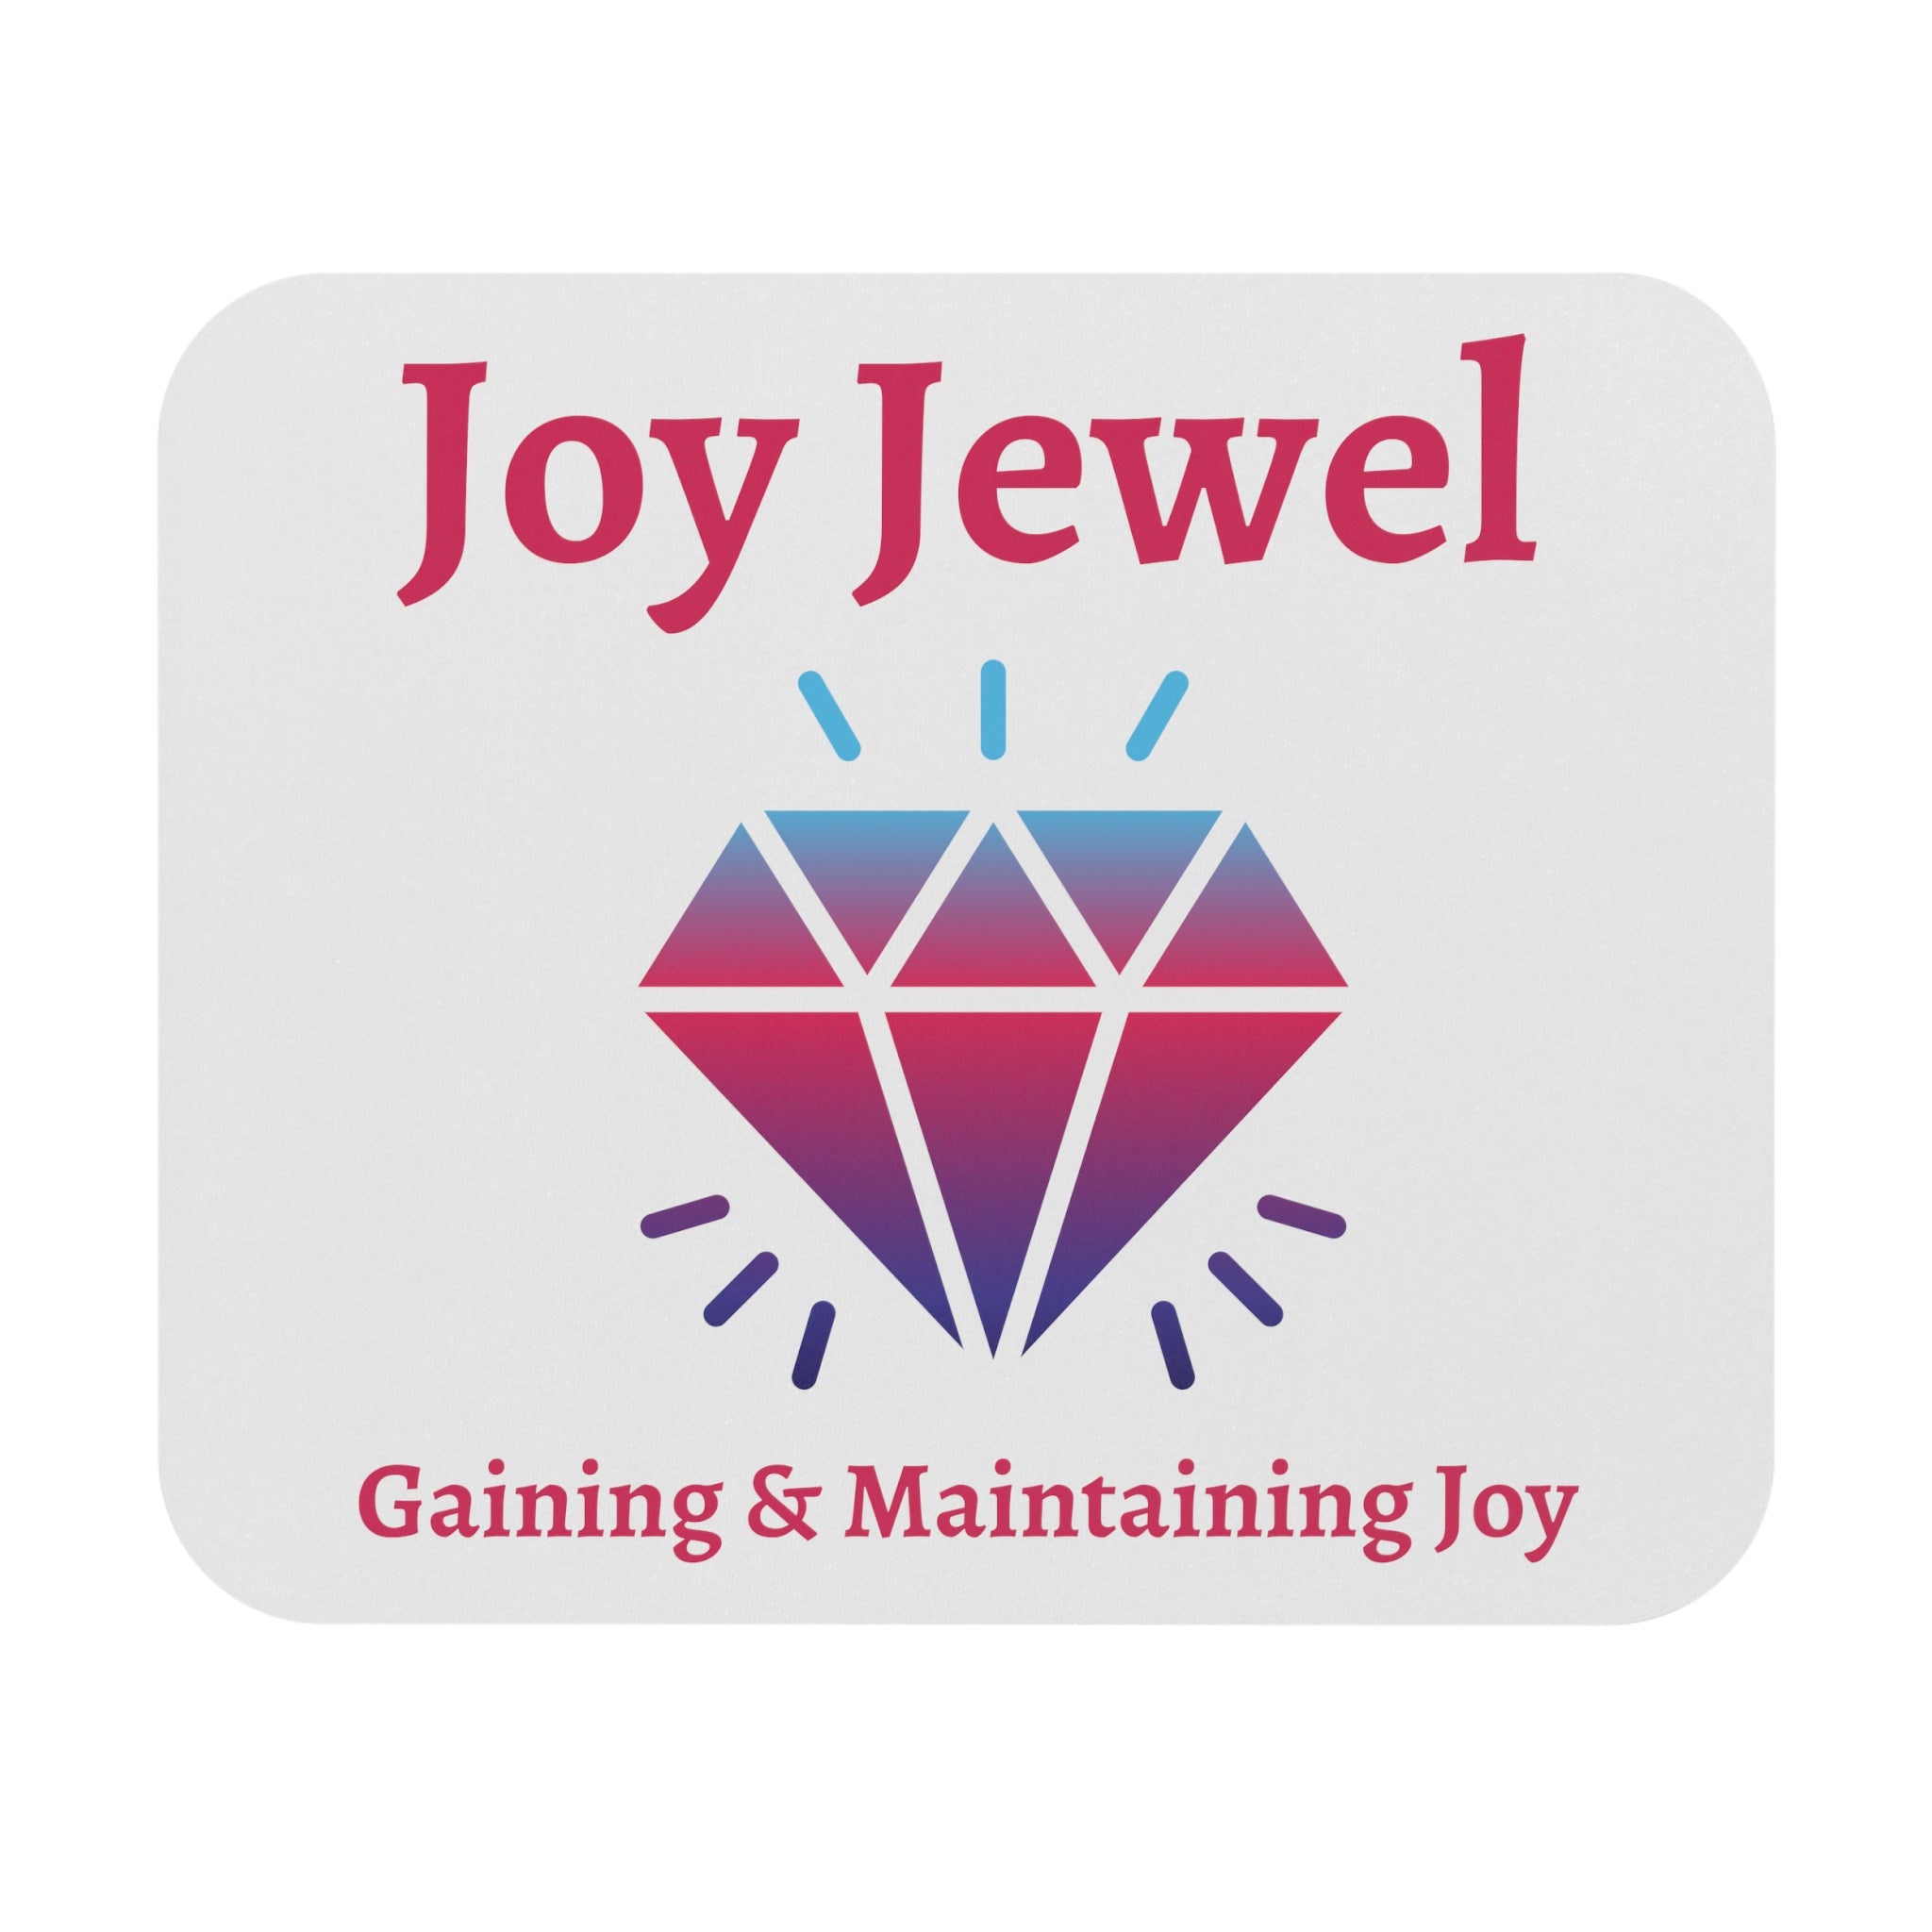 The Jewel Project